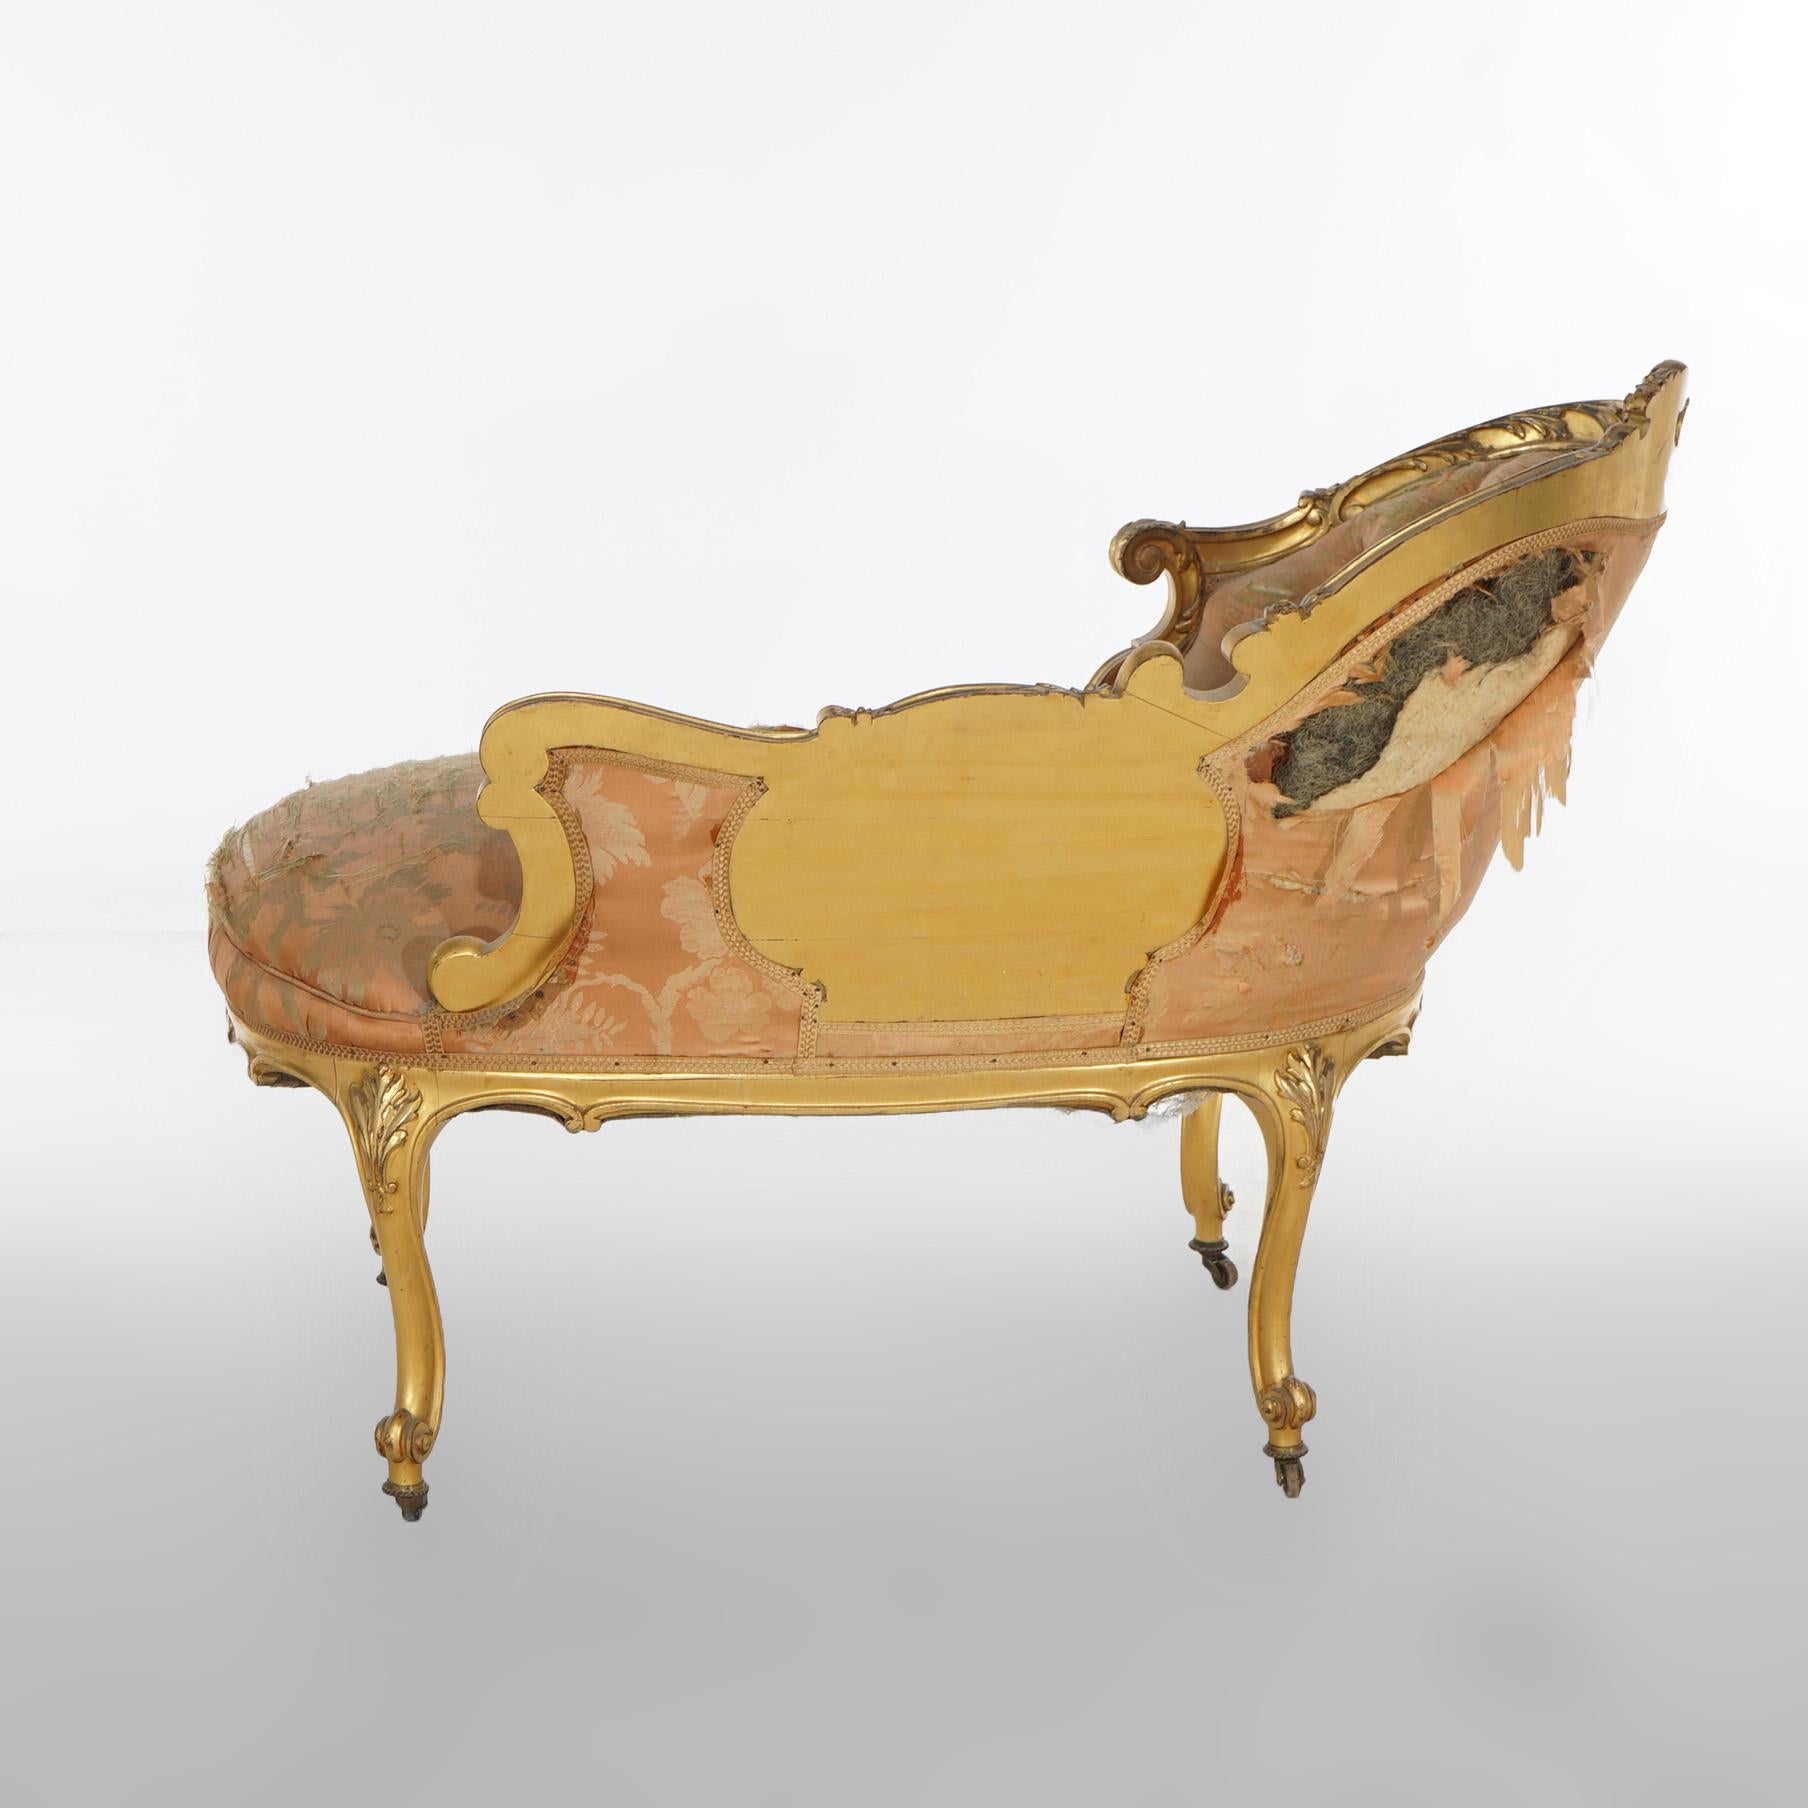 Early Antique French Rococo Vernis Martin & Giltwood Half-Recamier Settee 19th C For Sale 21